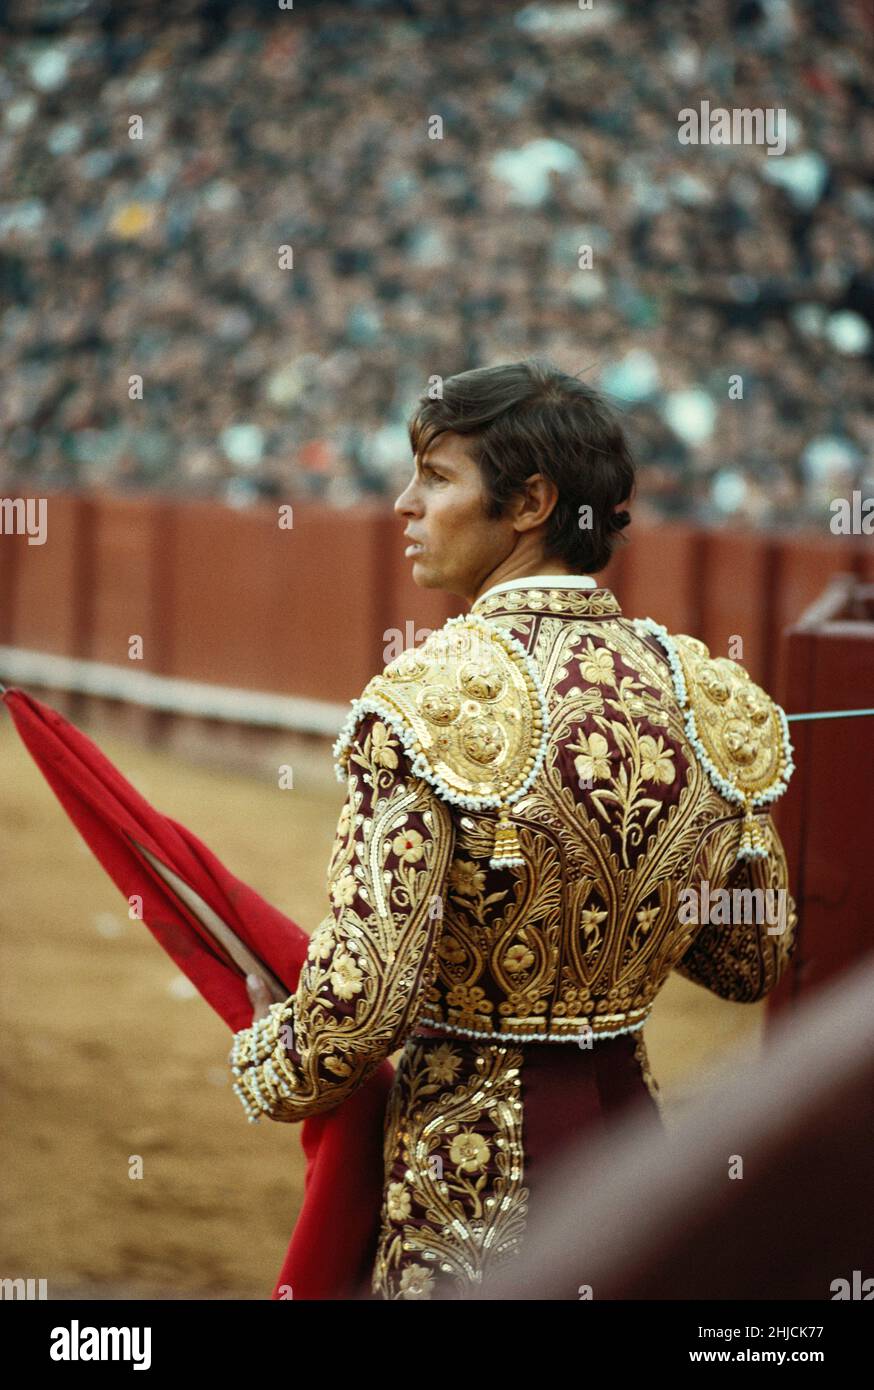 The bullfighter Manuel Ben√≠tez P√©rez, known as 'El Cordob√©s'  (The Cordovan), in Seville, Spain.  He was born a poor orphan on 4 May 1936 (probable date) in Palma del R√≠o near C√≥rdoba, and went on to become the highest paid torero in history, known for his theatrical style and daring tactics. Stock Photo